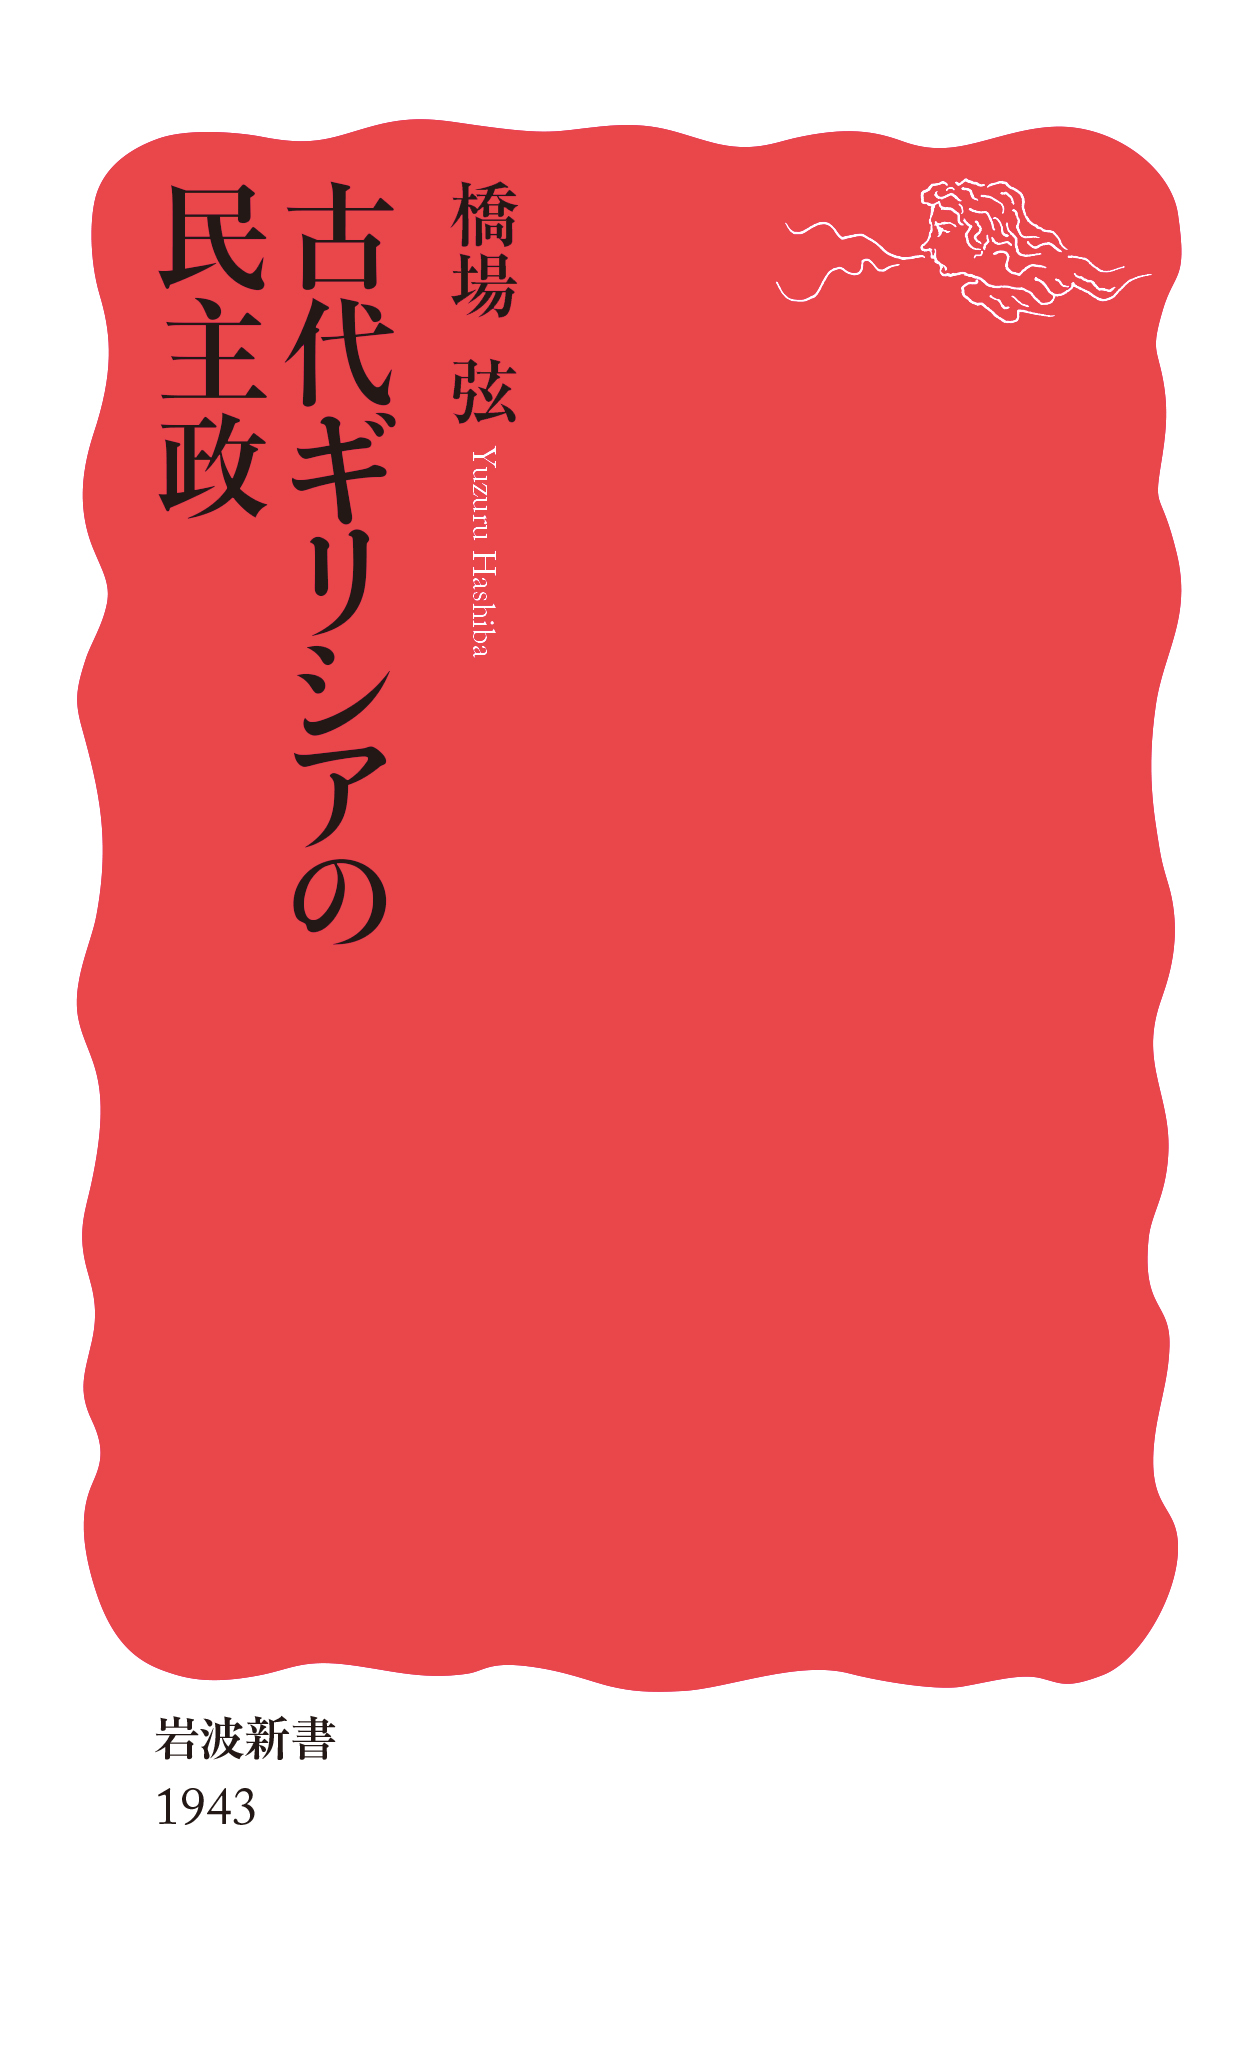 A red cover